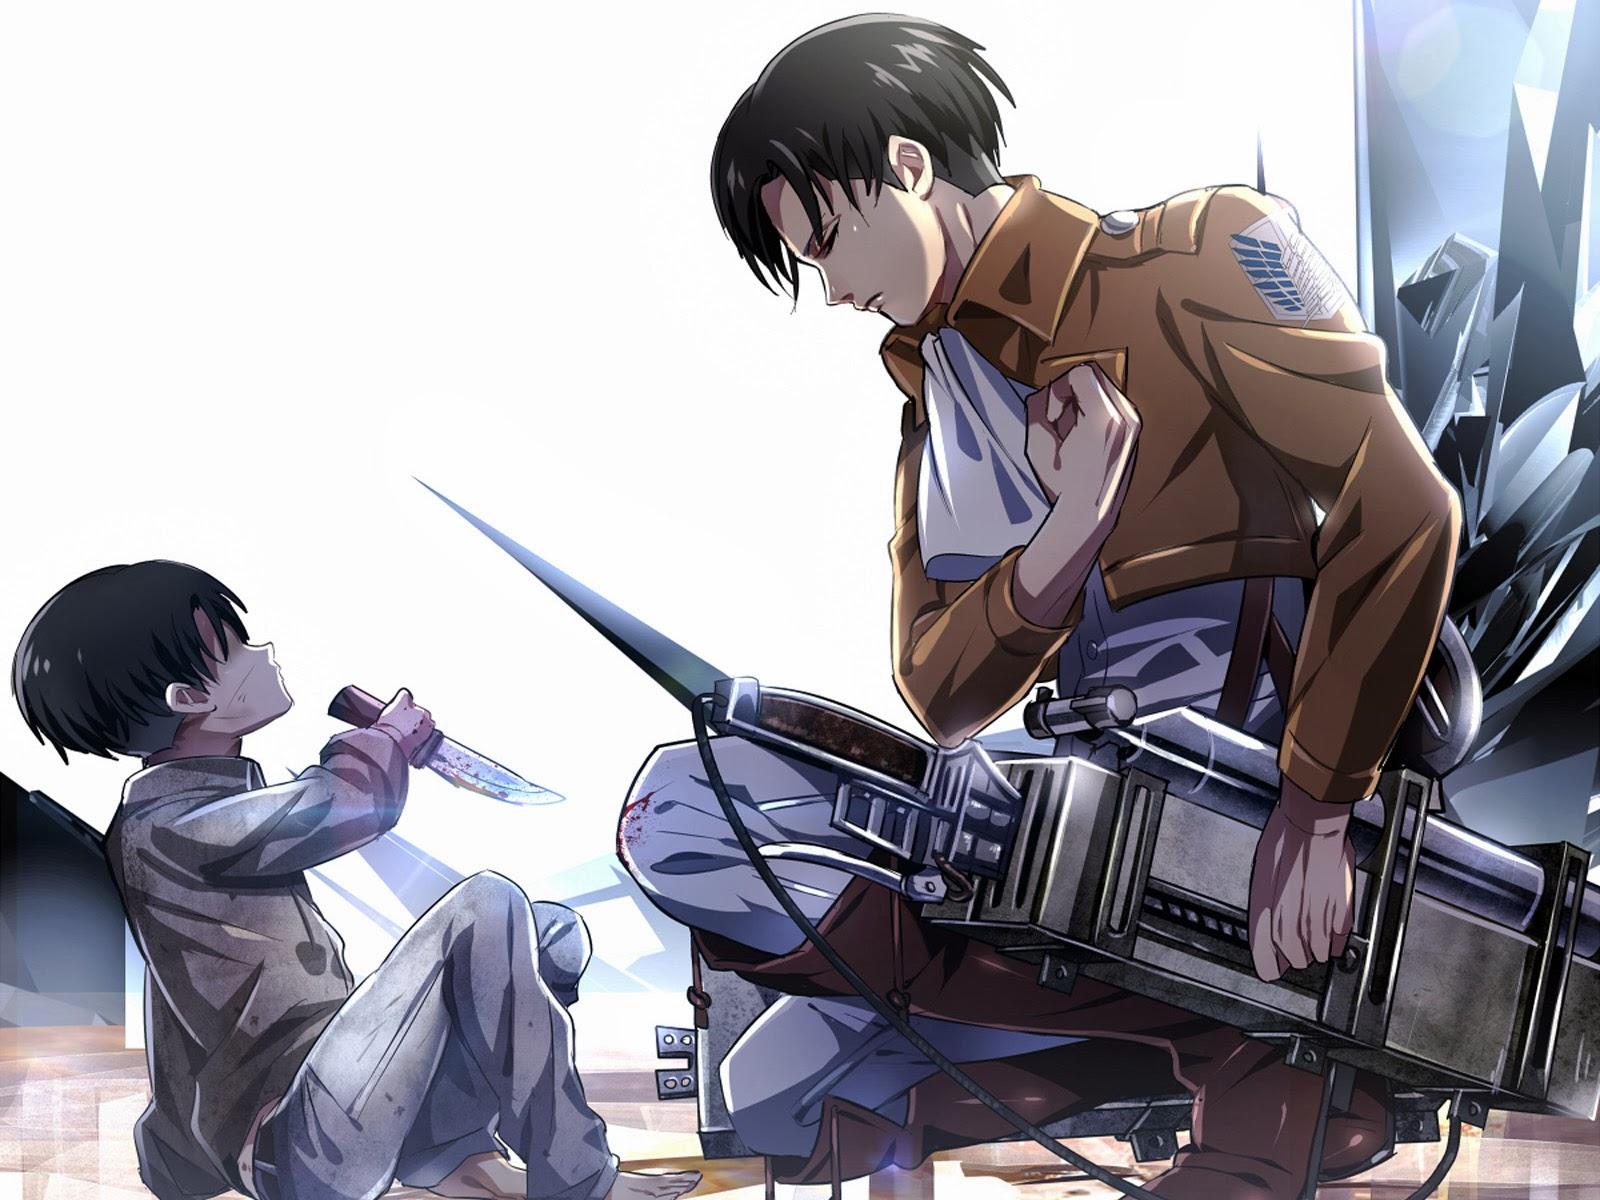 Levi Ackerman Wallpaper Makes Me Want To Cry A LOT For Some